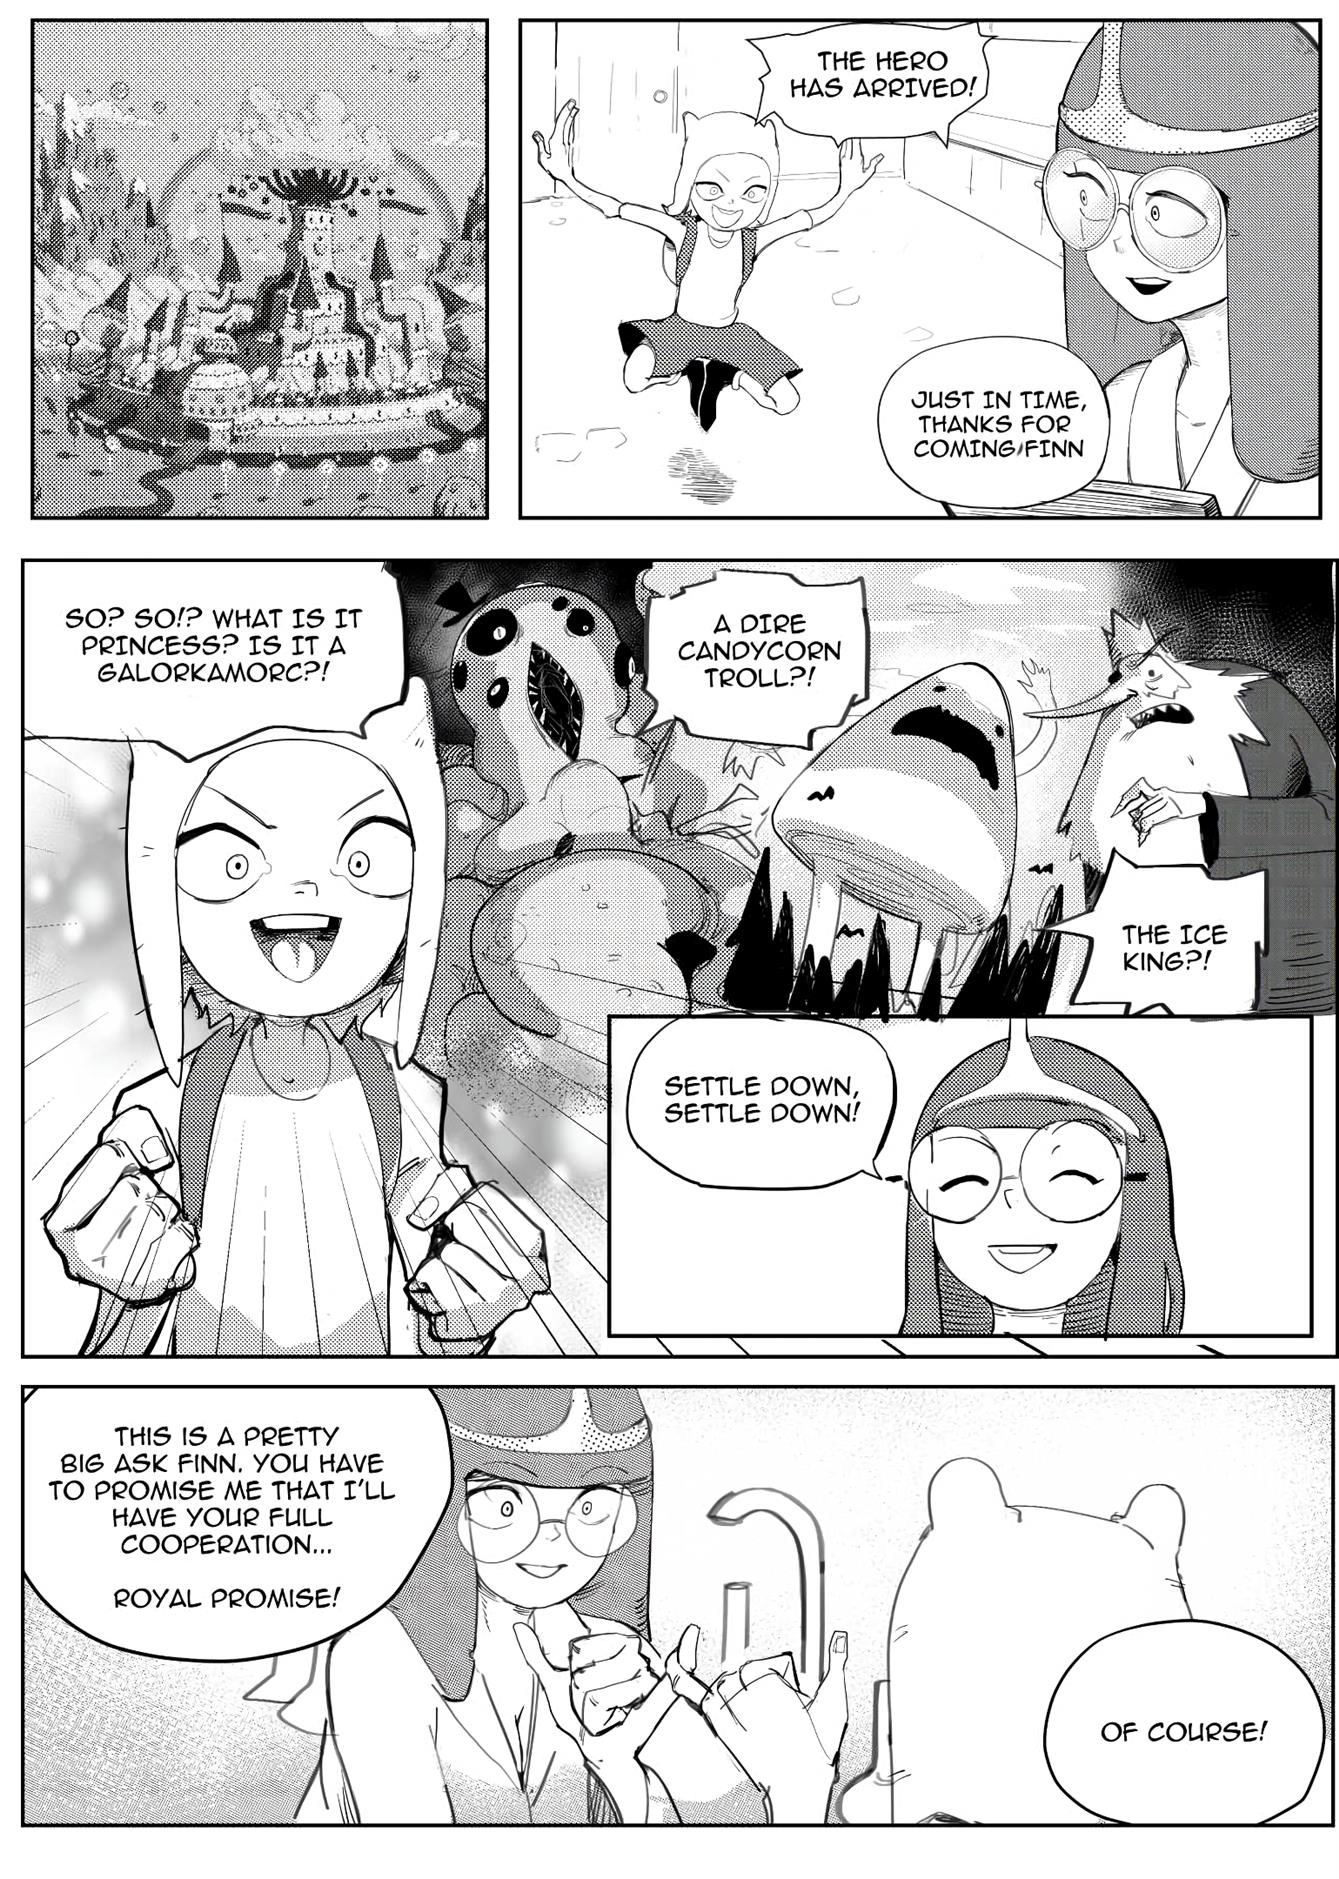 Reproduction Time (Adventure Time)